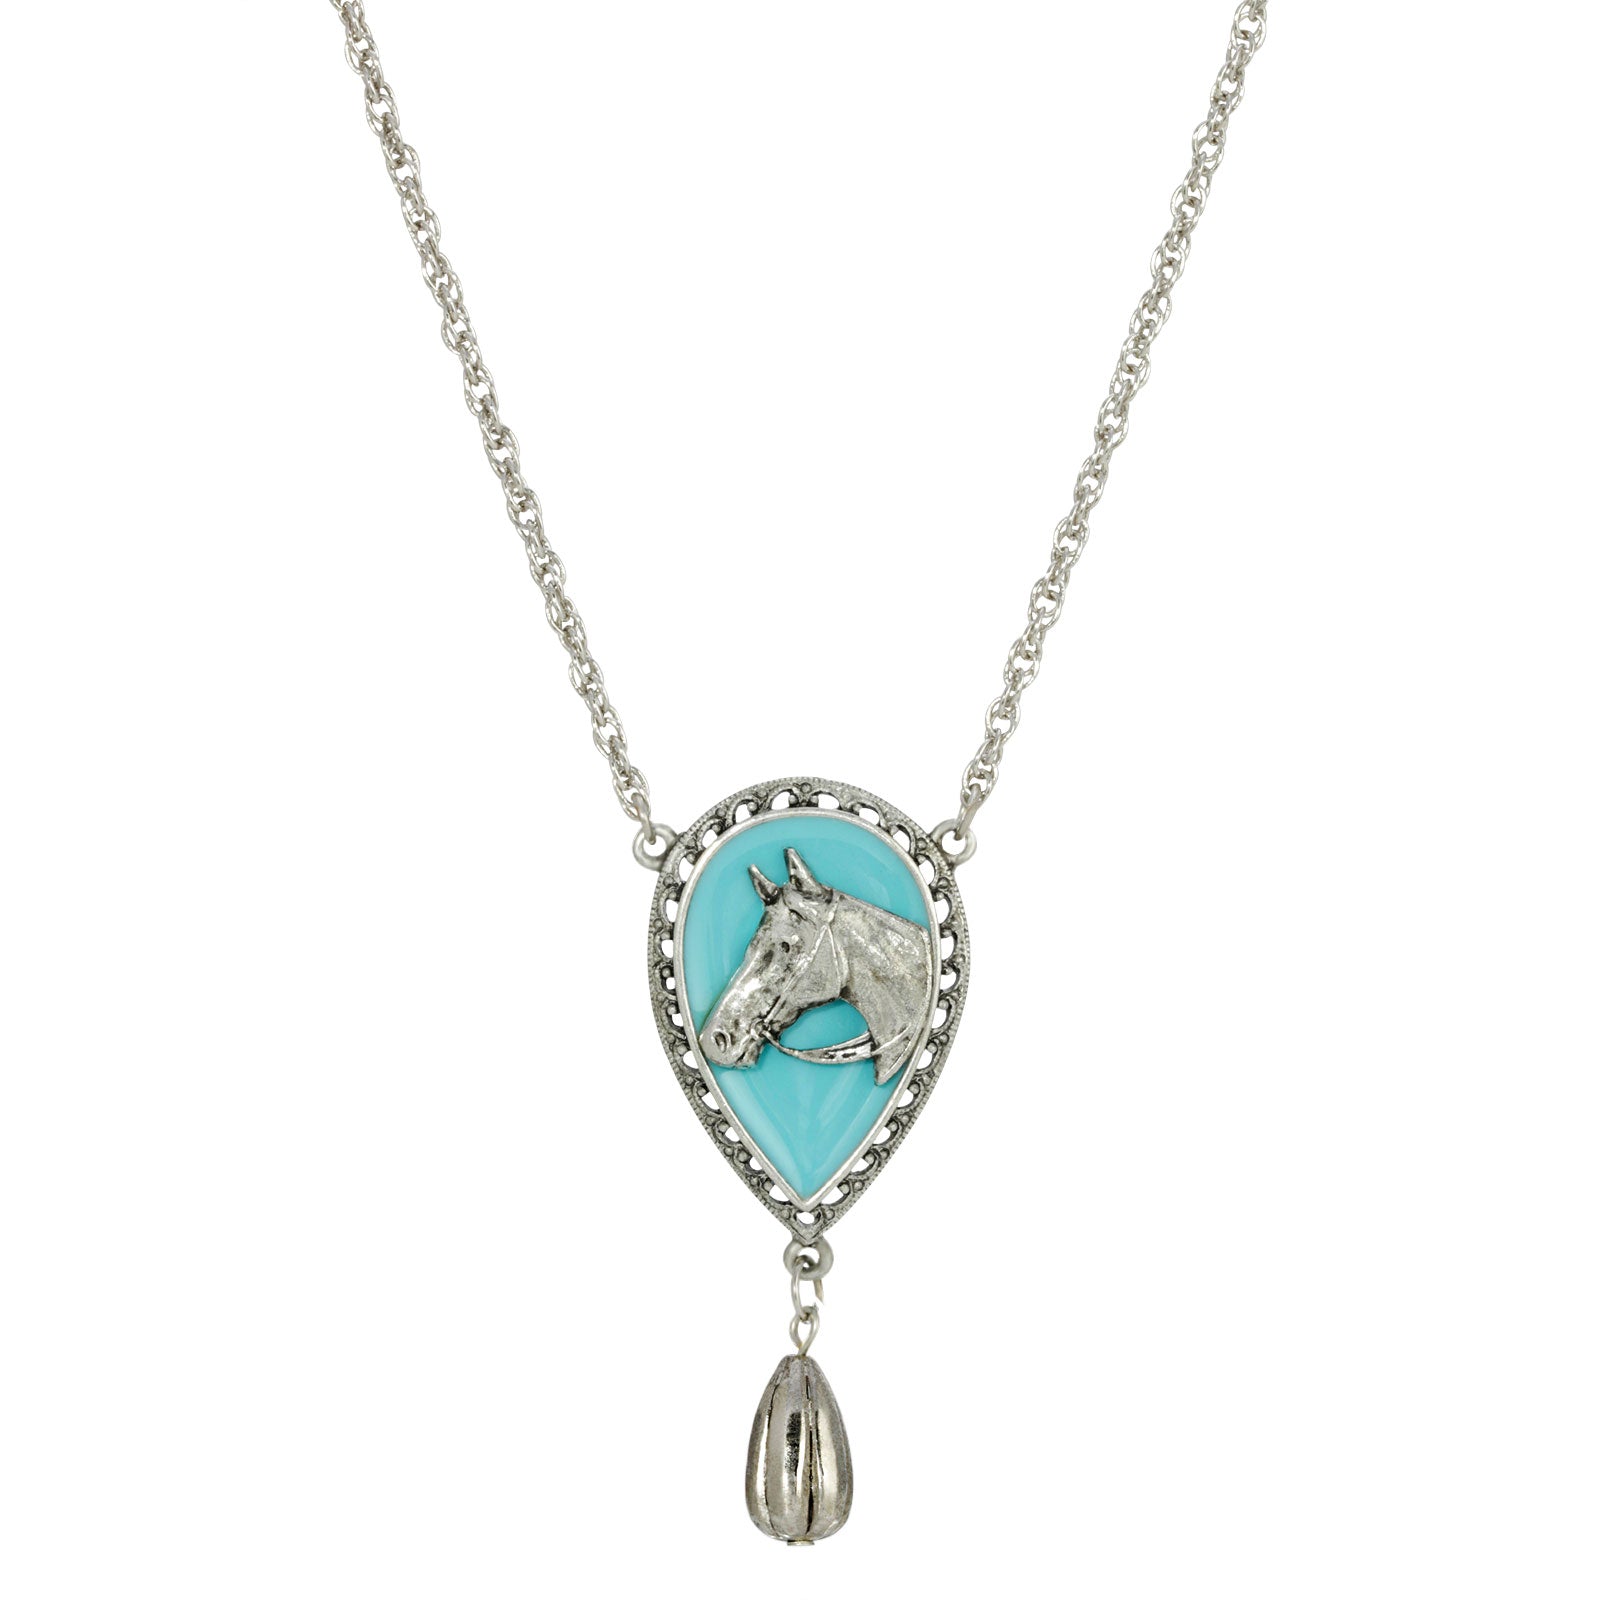 Silver Tone Turquoise Enamel Horse Head Necklace 18 Inch